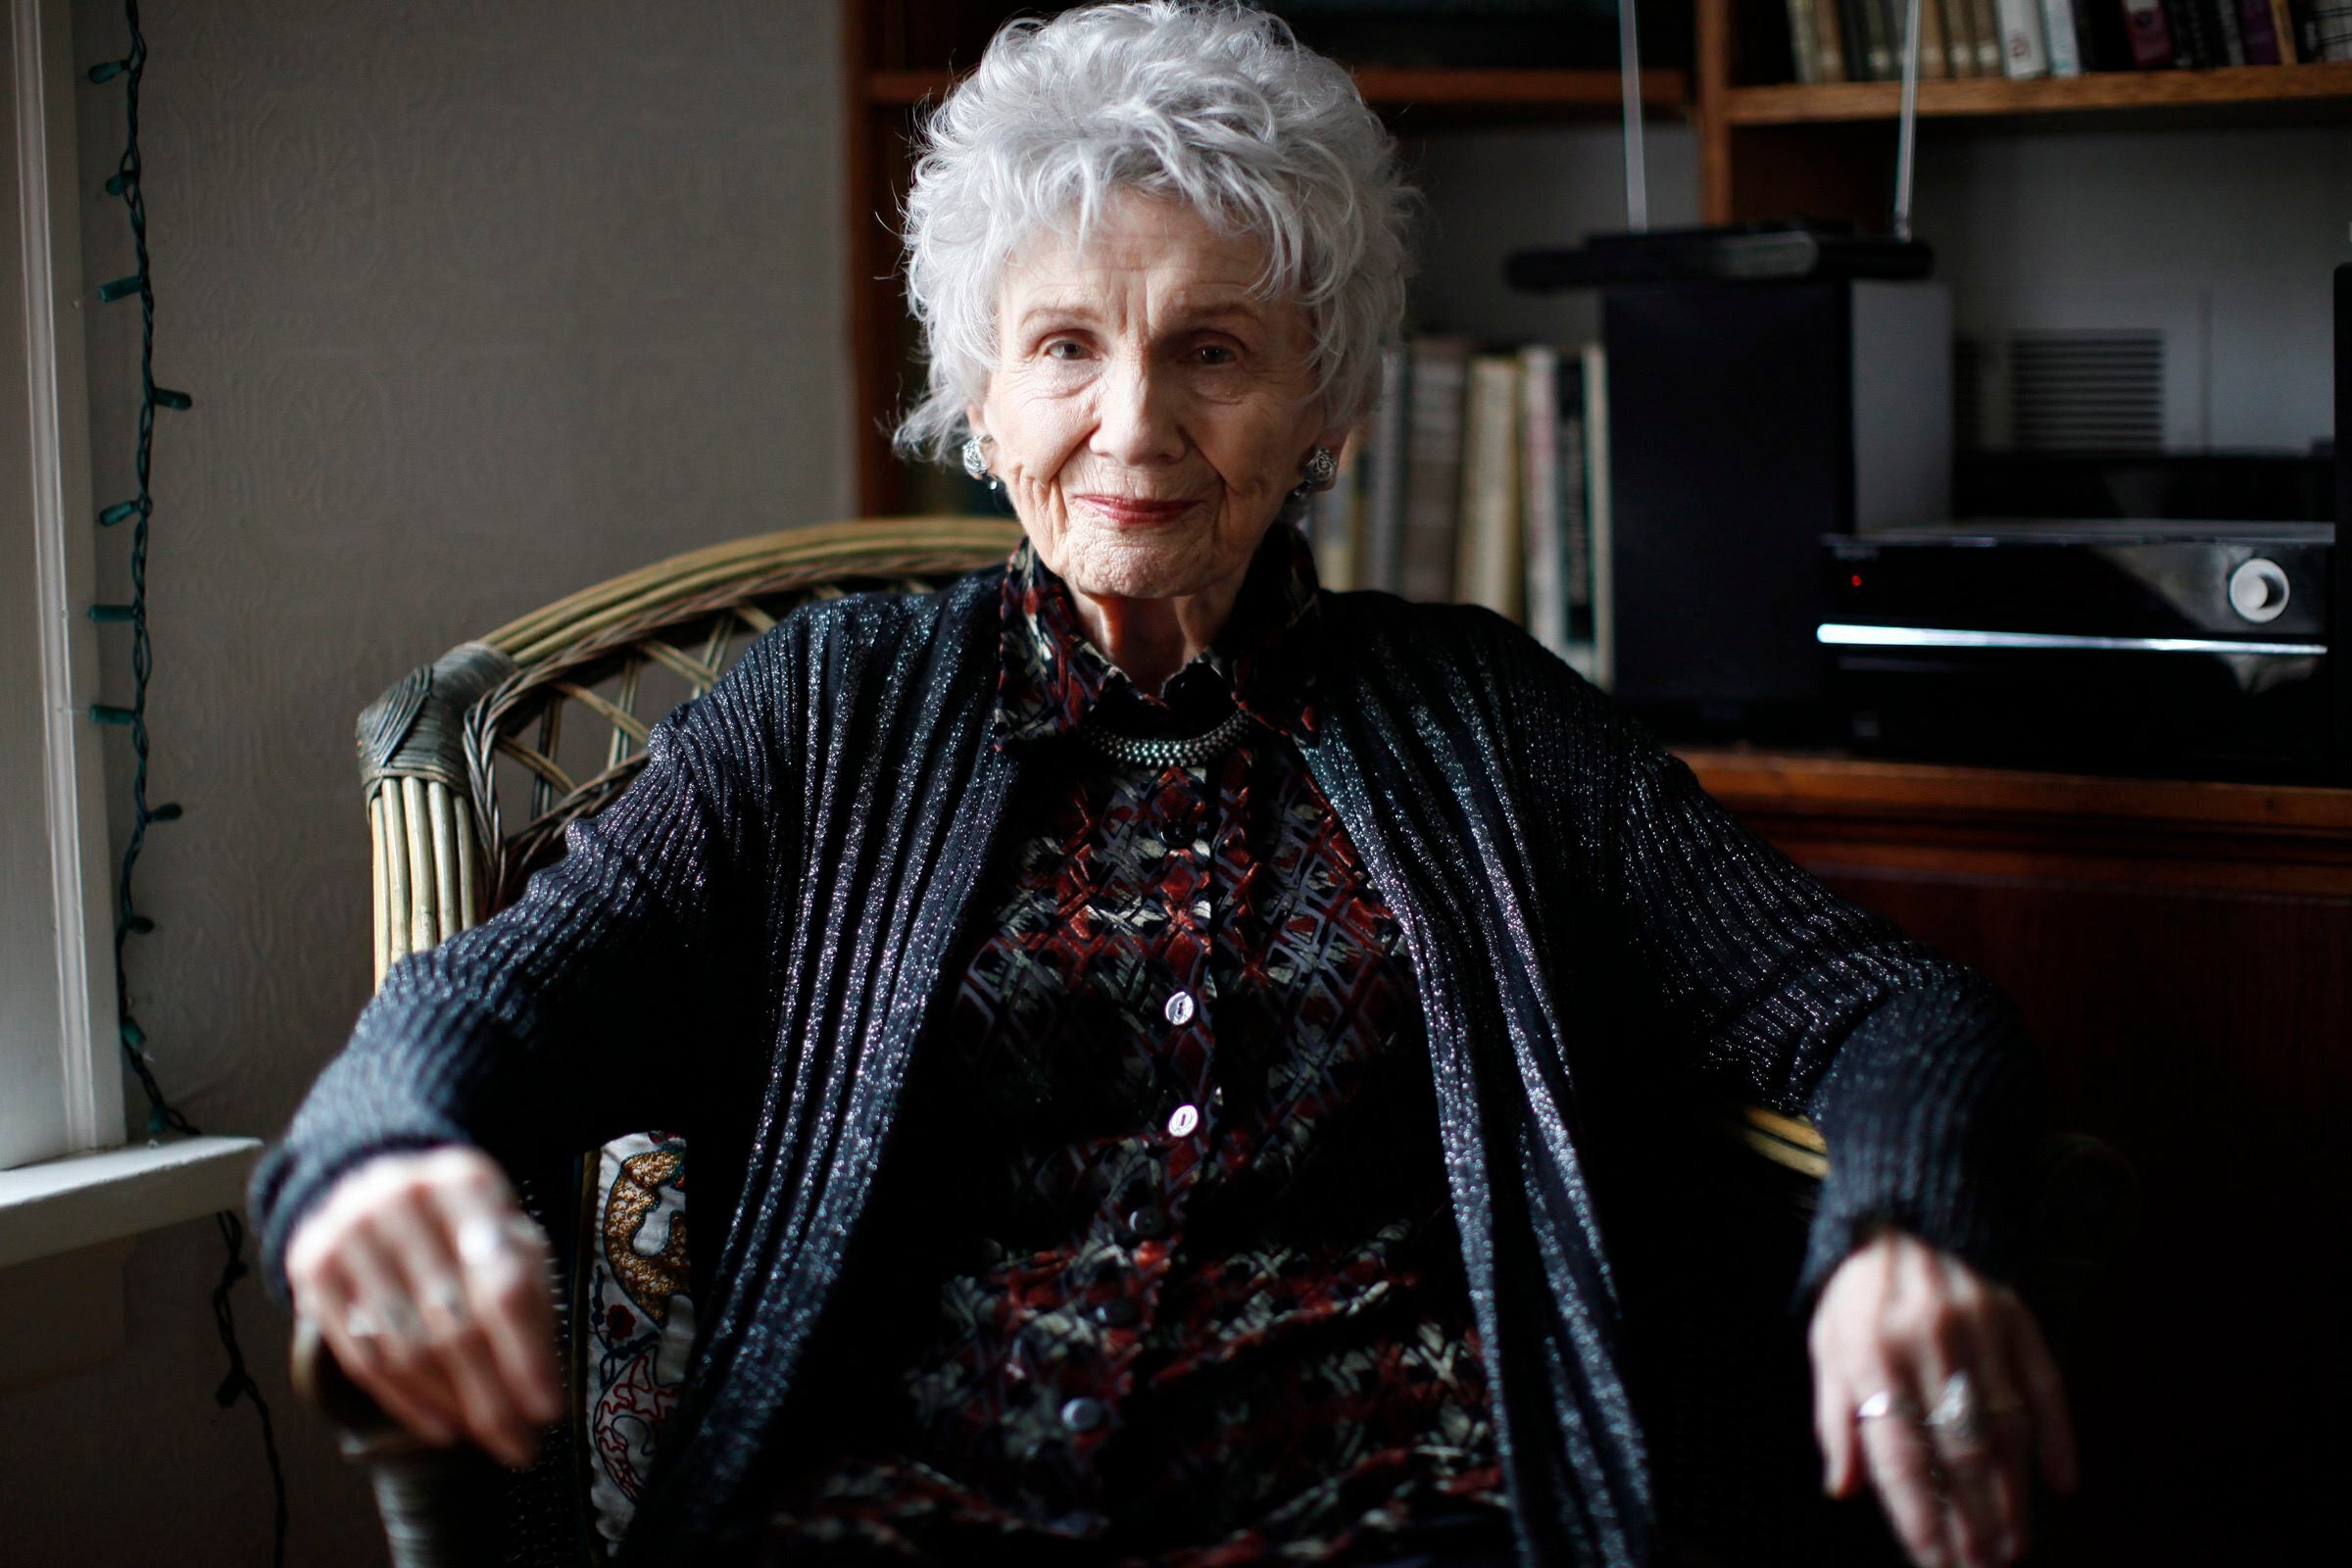 Andrea Skinner wrote an essay in which she detailed the child sexual abuse she suffered, ignored by her mother – Alice Munro